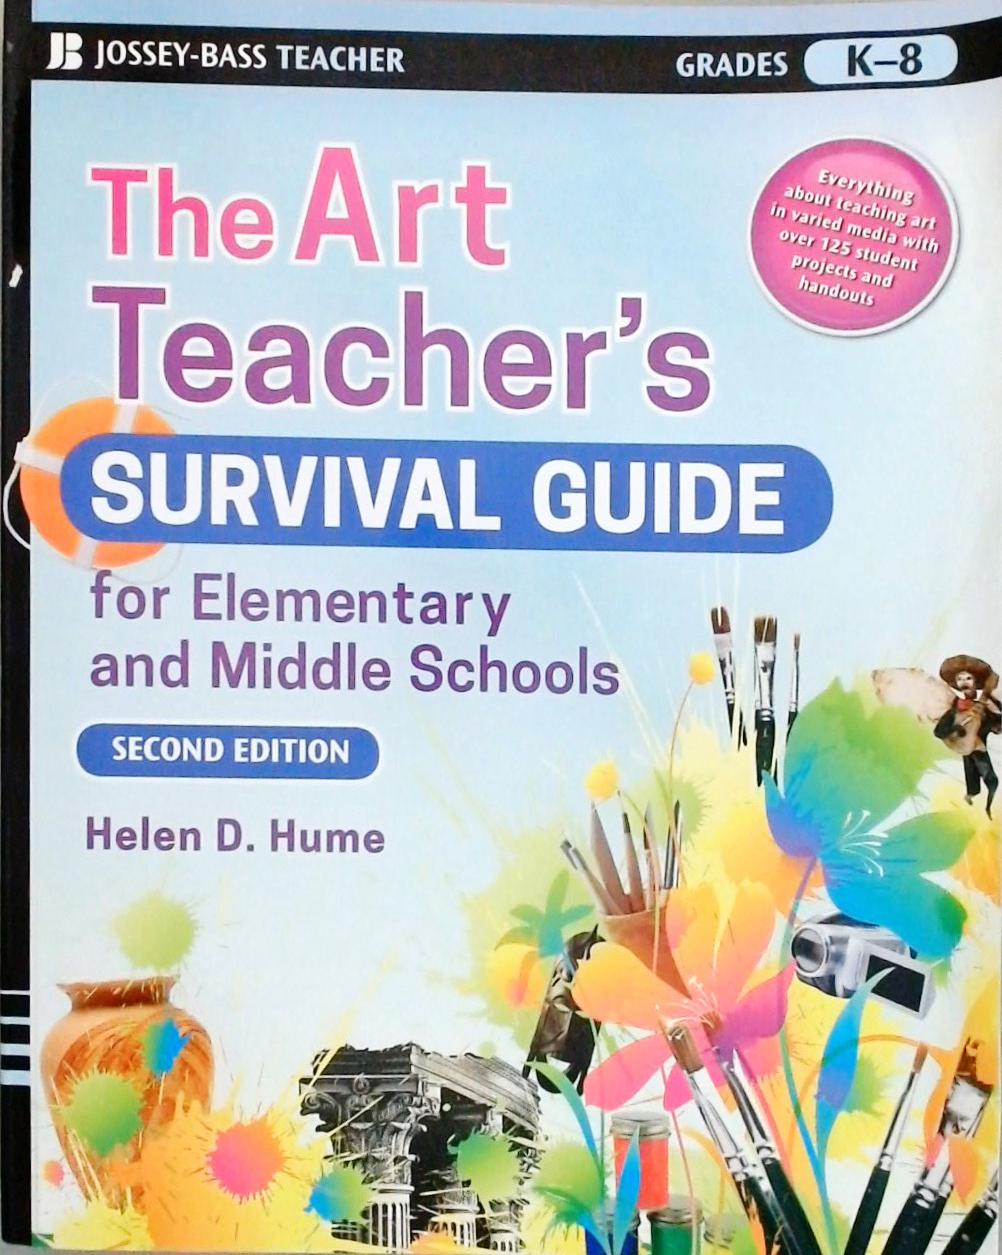 The Art Teachers Survival Guide for Elementary and Middle Schools